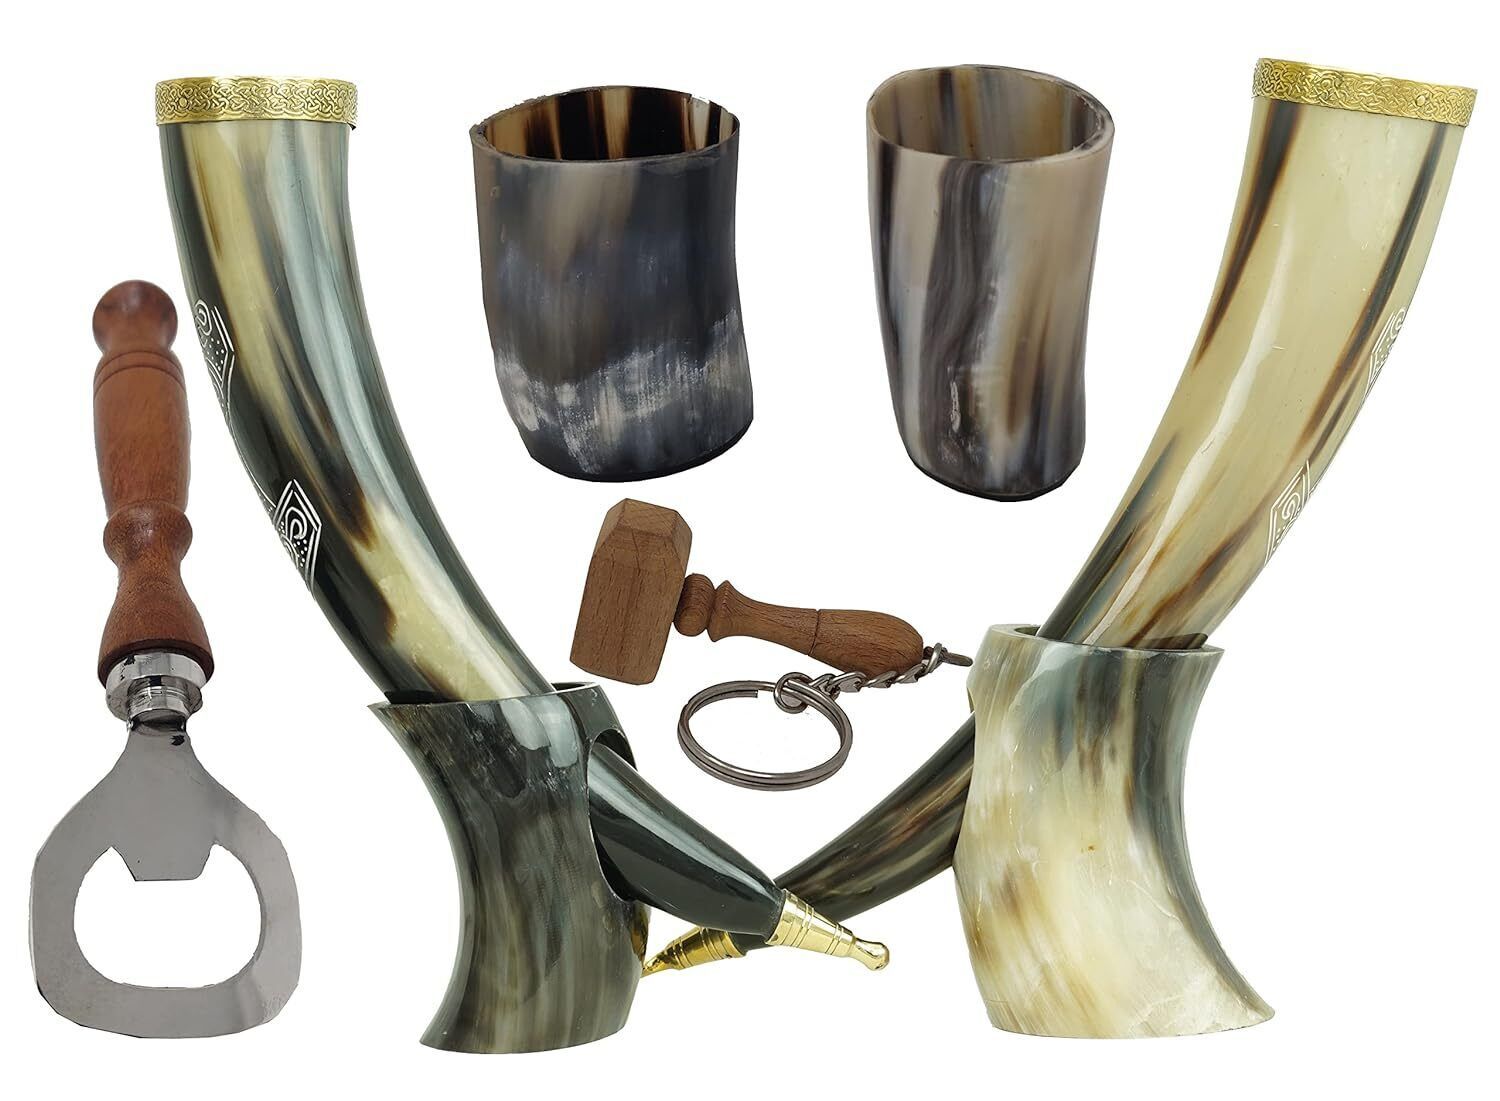 Primary image for Set of 2 Viking Drinking OX Horn | Tankard | Mug | Cup for Ale, Beer, Mead, Win